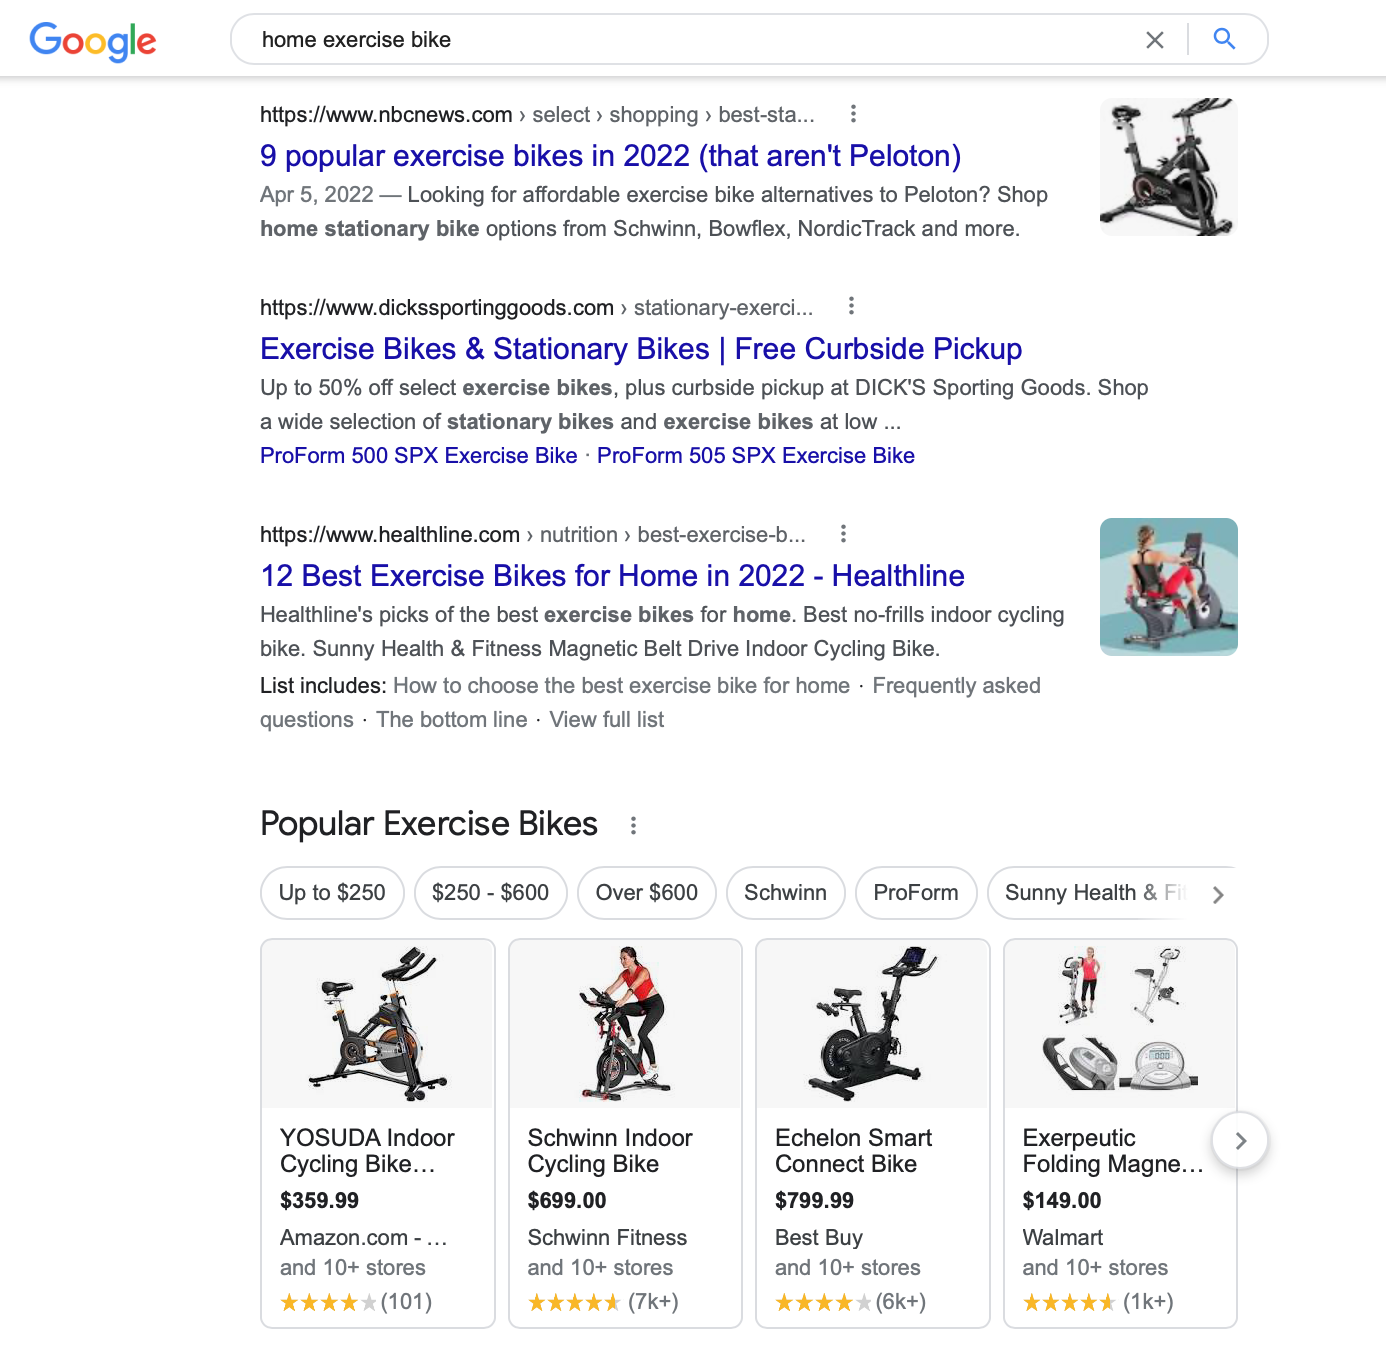 Home exercise bike search on Google